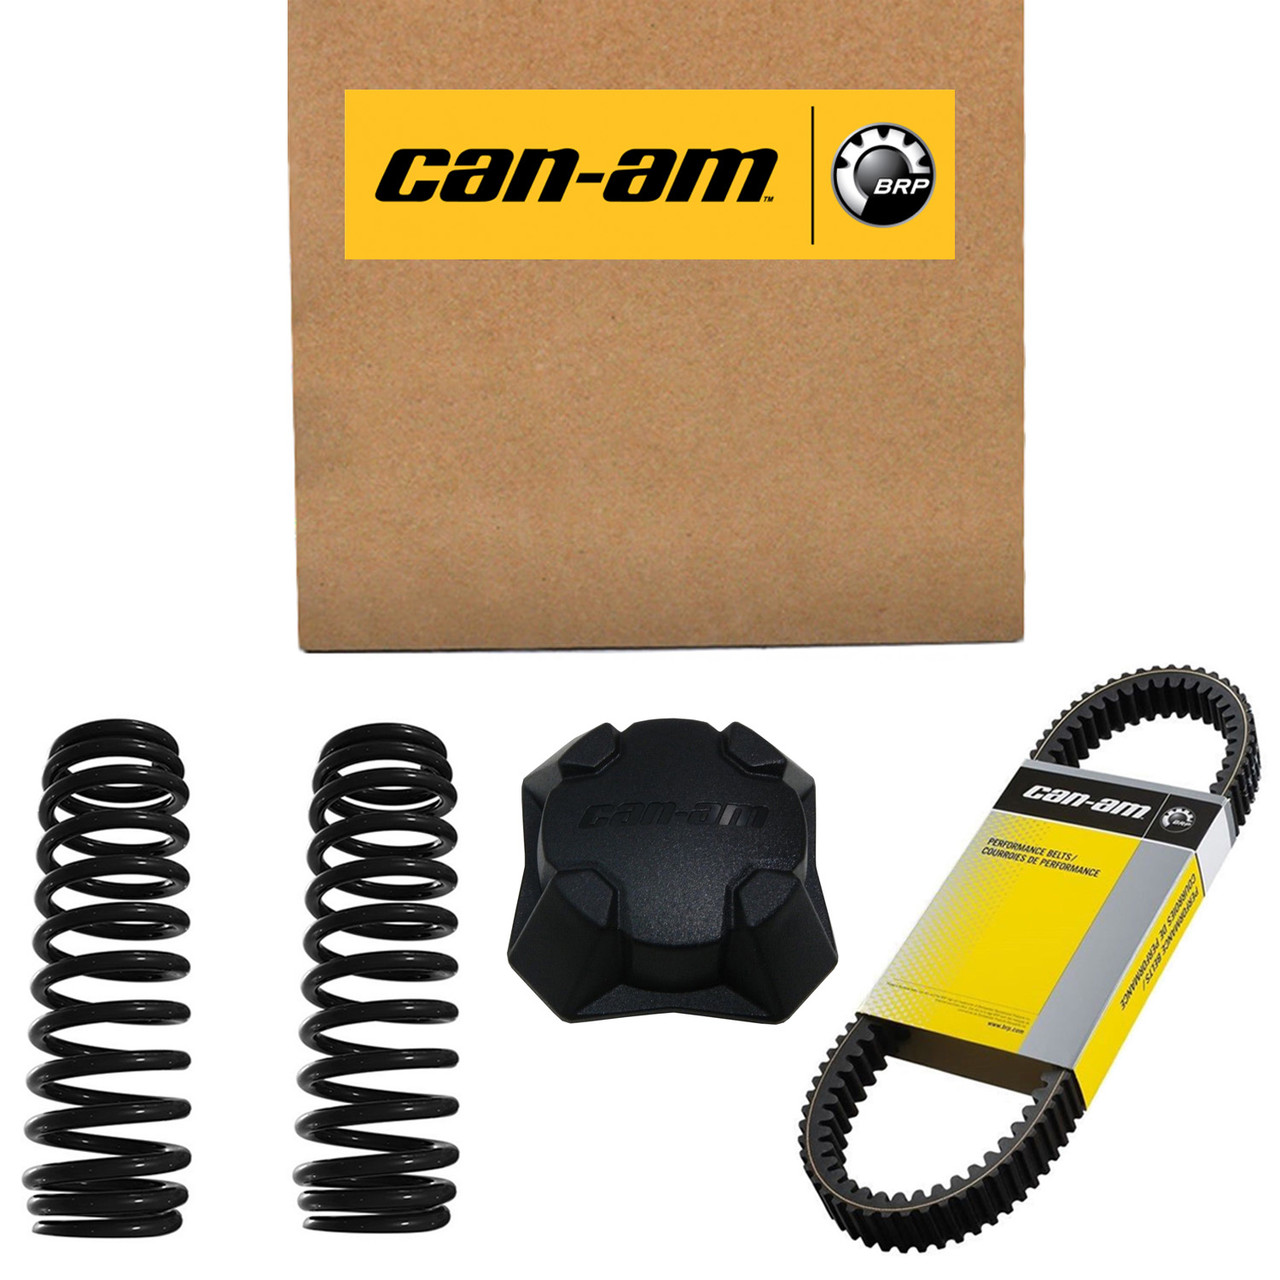 Can-Am New OEM Reflector, S33741M9A000